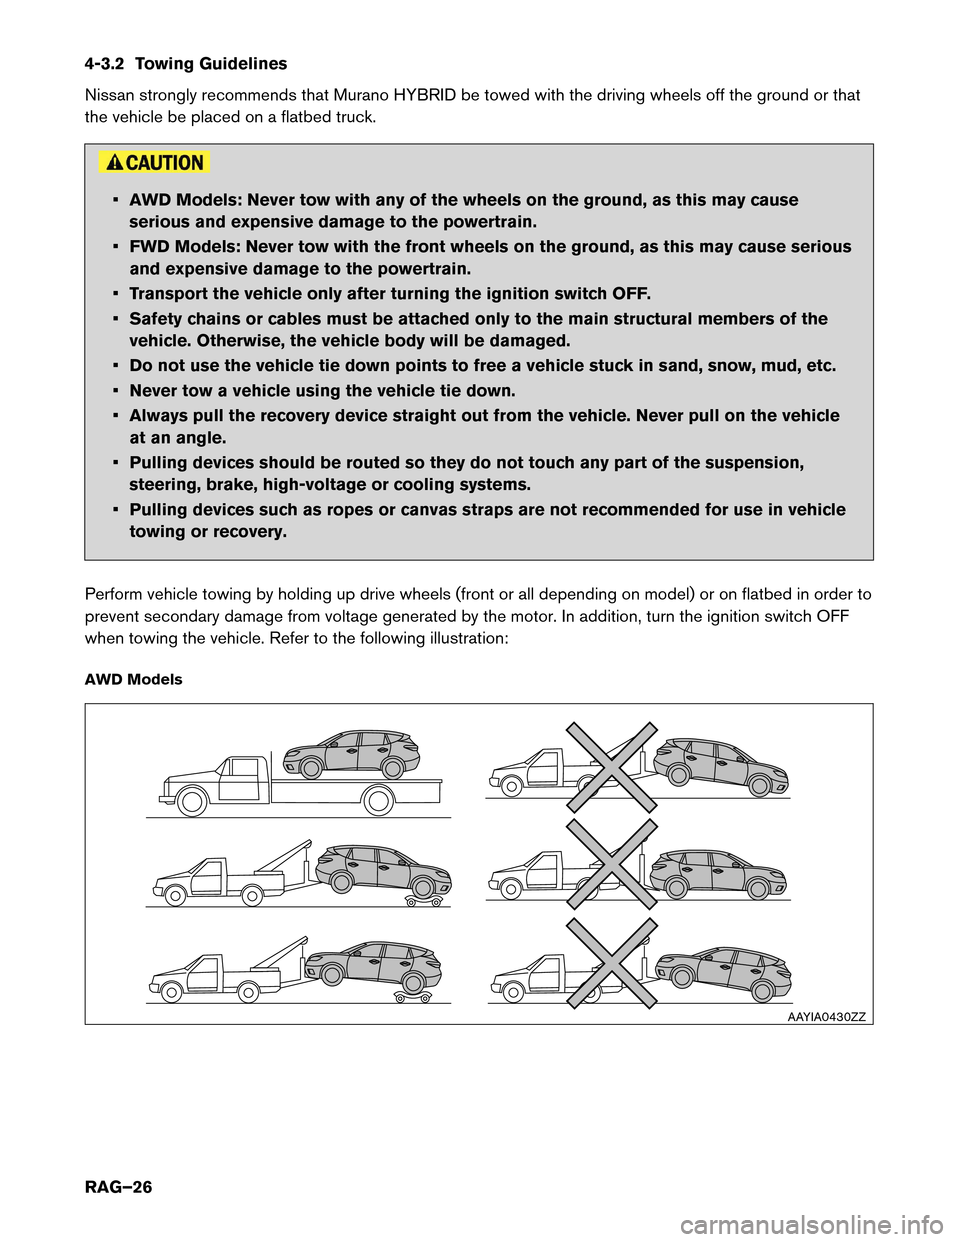 NISSAN MURANO HYBRID 2016 3.G Roadside Assistance Guide 4-3.2 Towing Guidelines
Nissan
strongly recommends that Murano HYBRID be towed with the driving wheels off the ground or that
the vehicle be placed on a flatbed truck. • AWD Models: Never tow with a